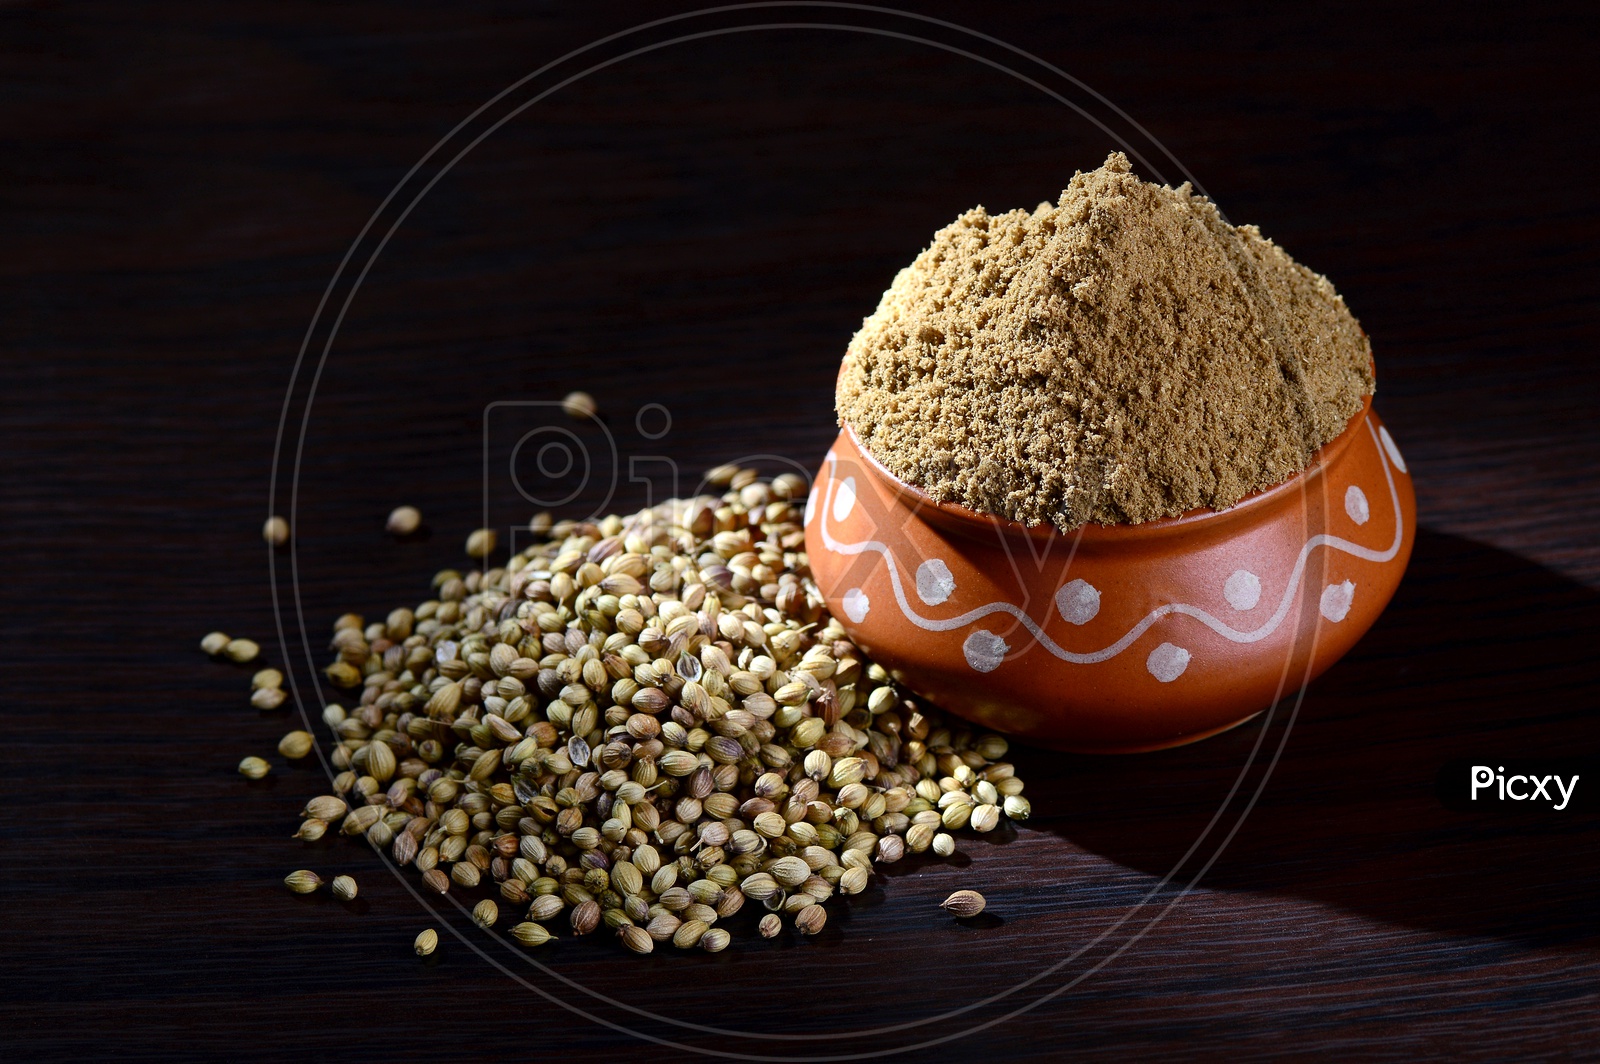 Coriander seeds and Powdered coriander in clay pot on wooden background.